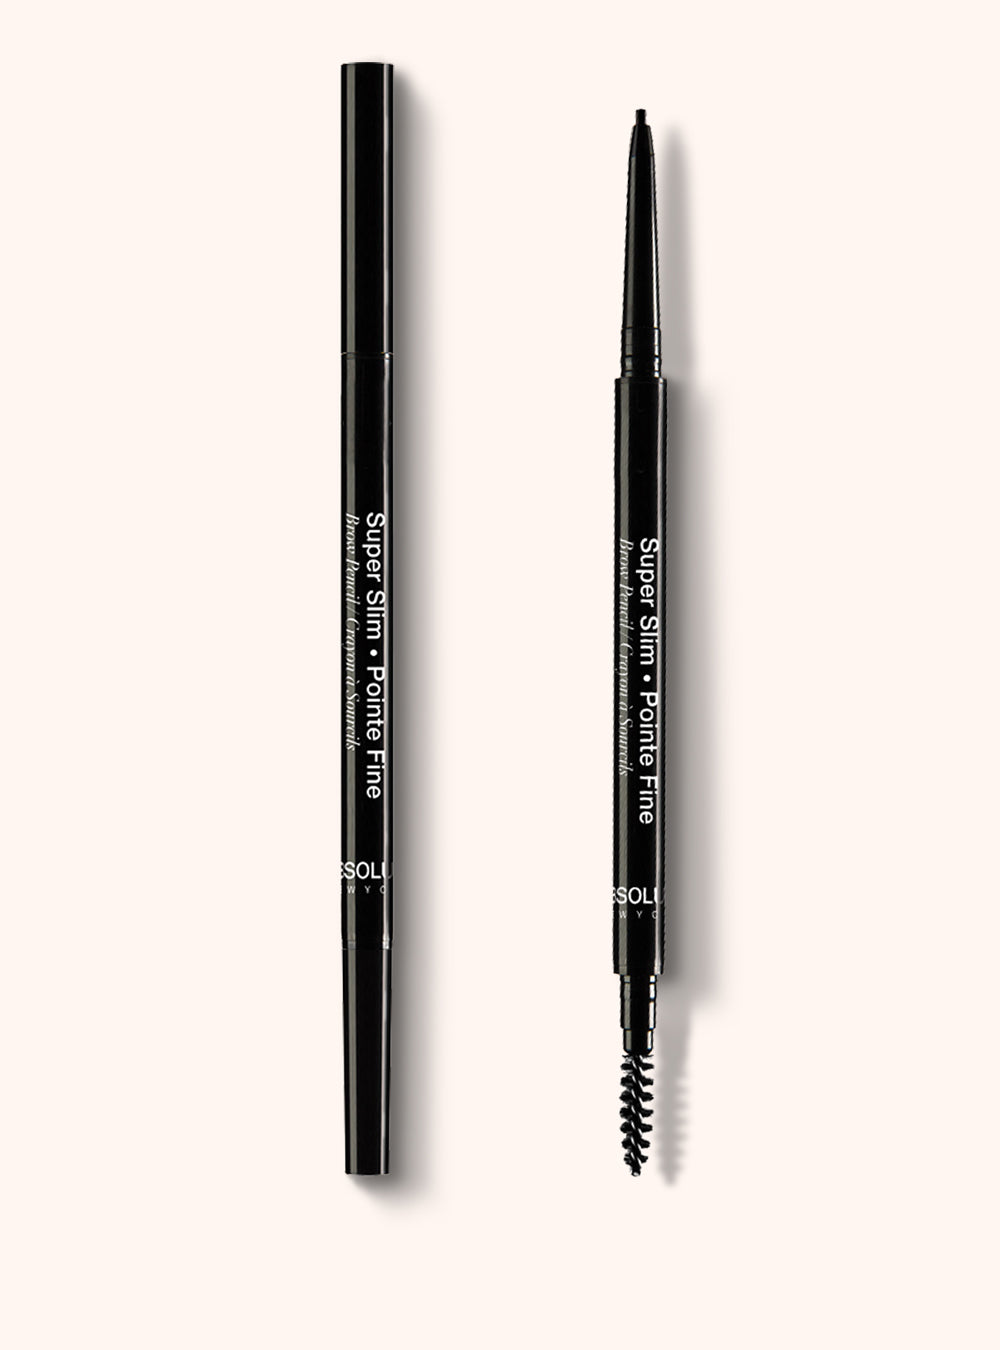 Pencil – Slim York Get Brow Hair-Like Strokes - Brow New Absolute Super to Pencil Fine-Tip